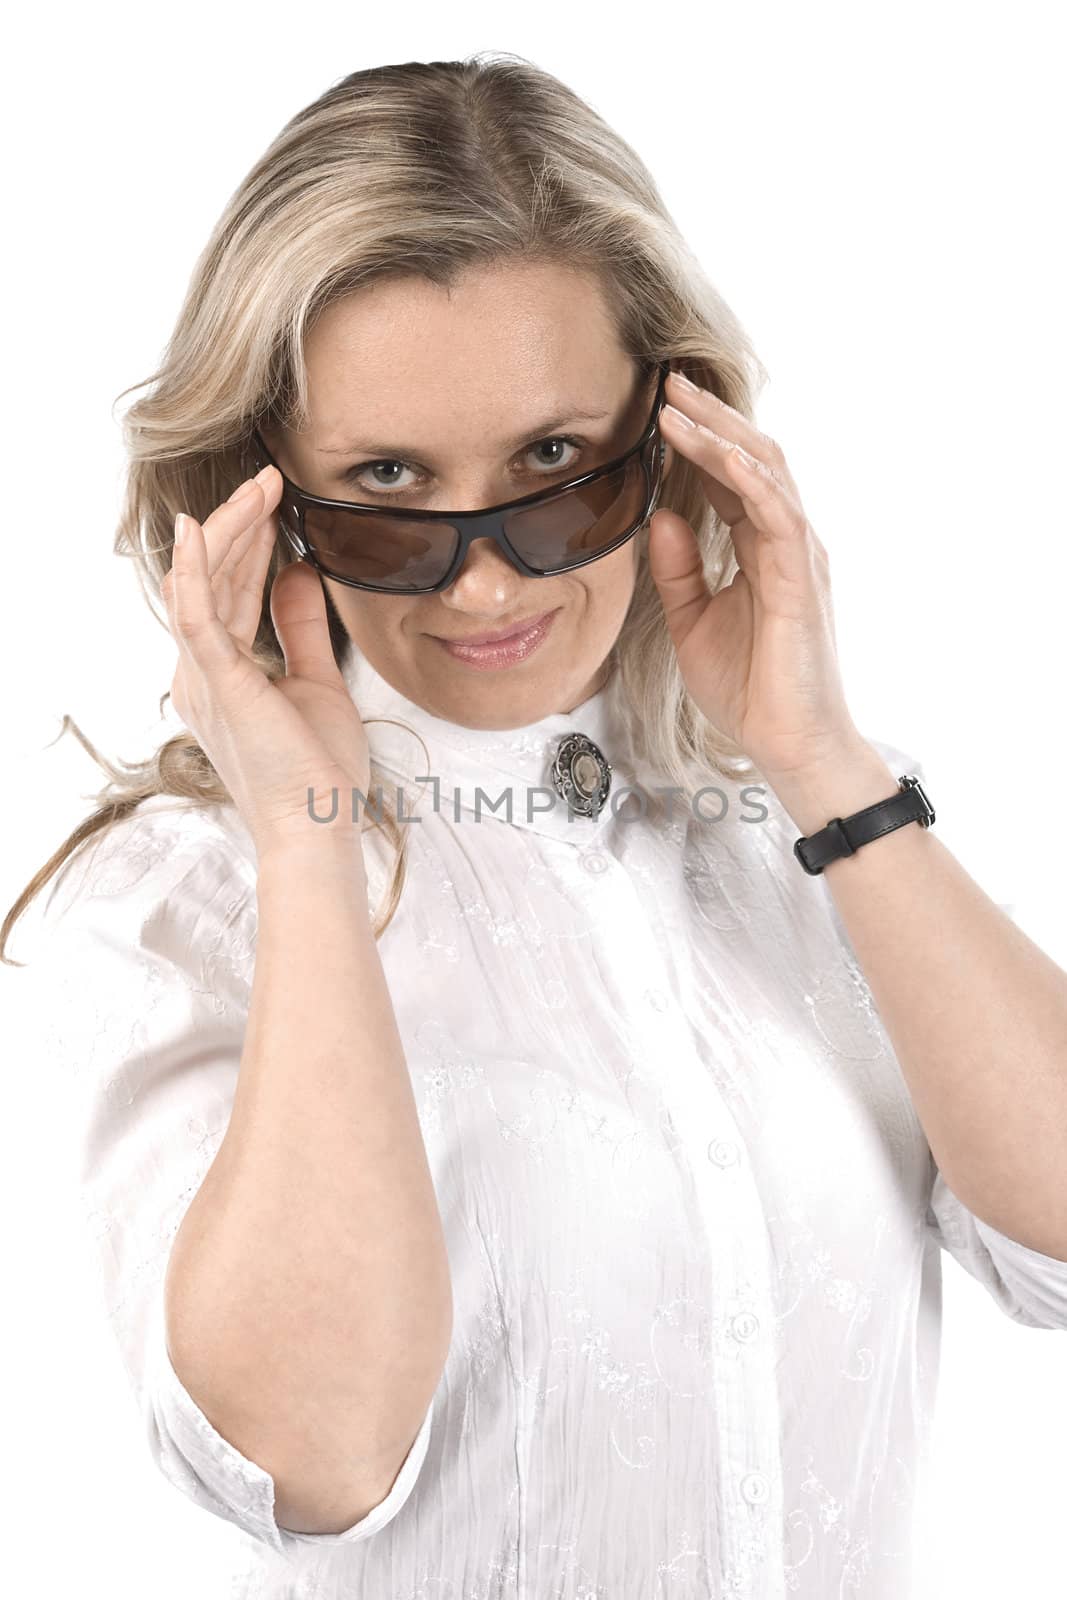 Young women with sunglasses. White shirt. White background.